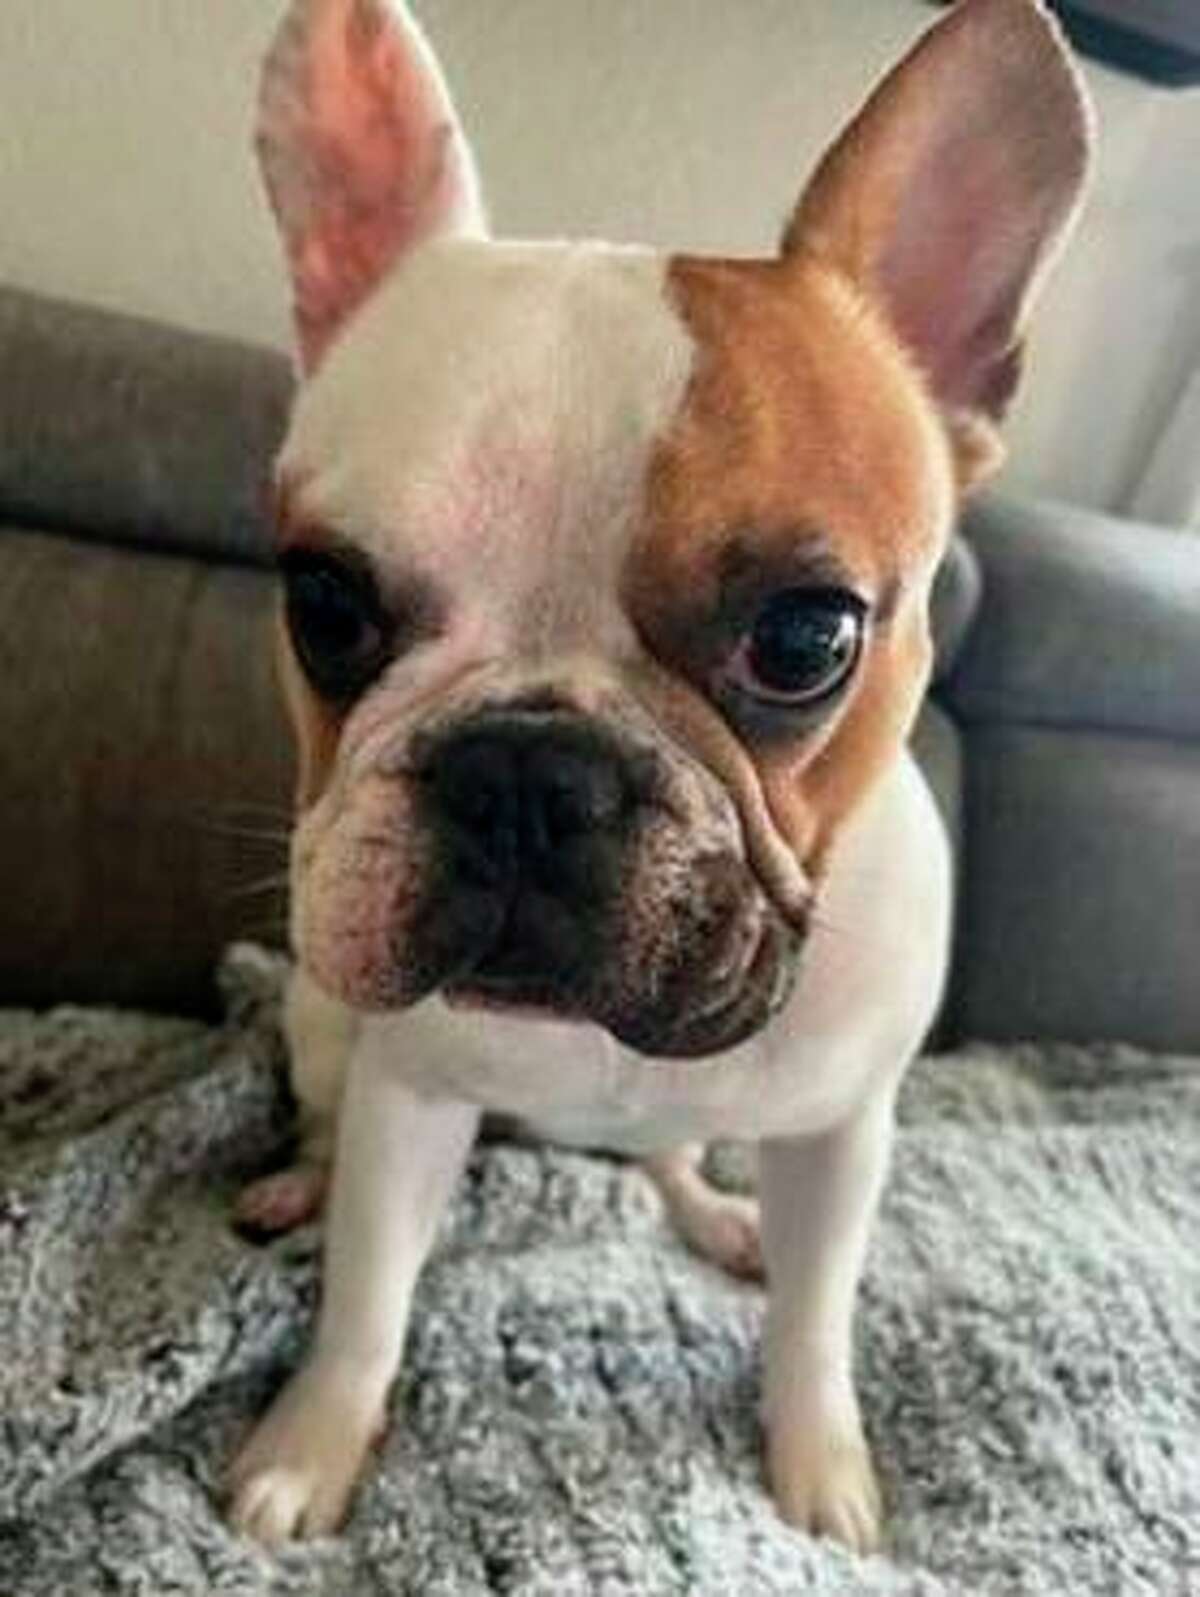 Tito, a French bulldog, was taken from his owner at gunpoint Saturday during a walk in Castro Valley, Alameda County sheriff’s officials said.